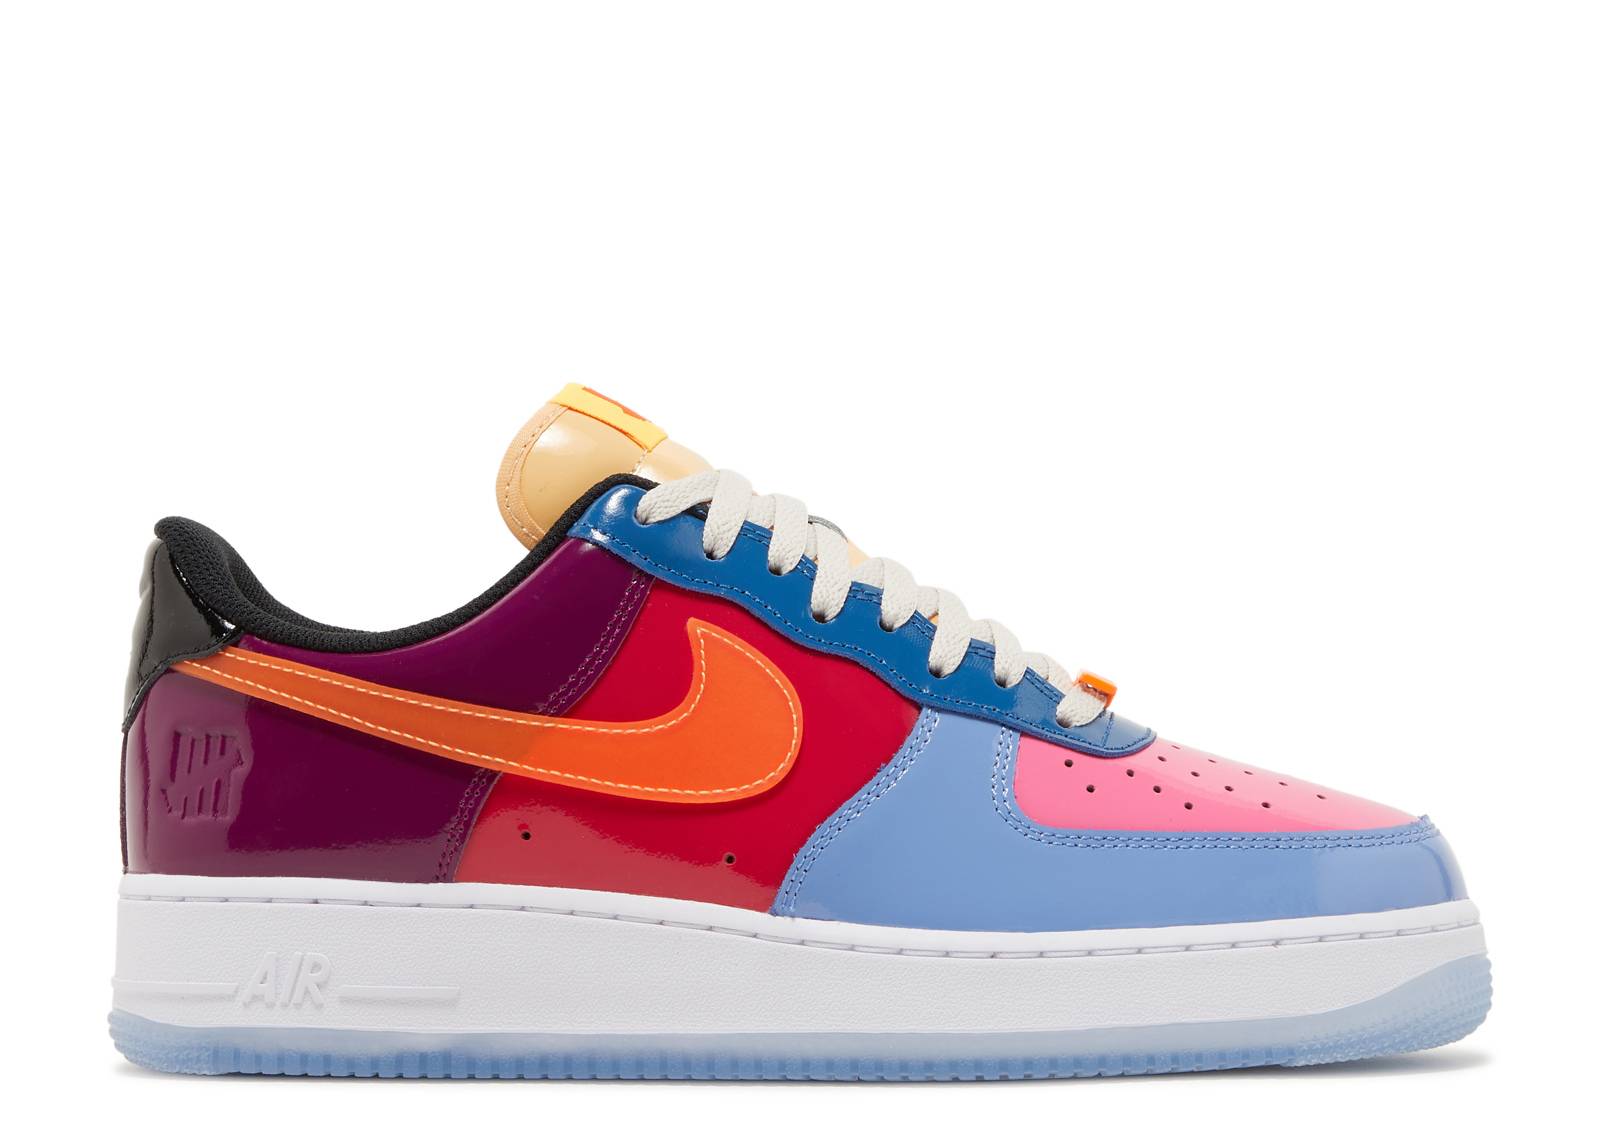 Undefeated x Air Force 1 Low Total Orange